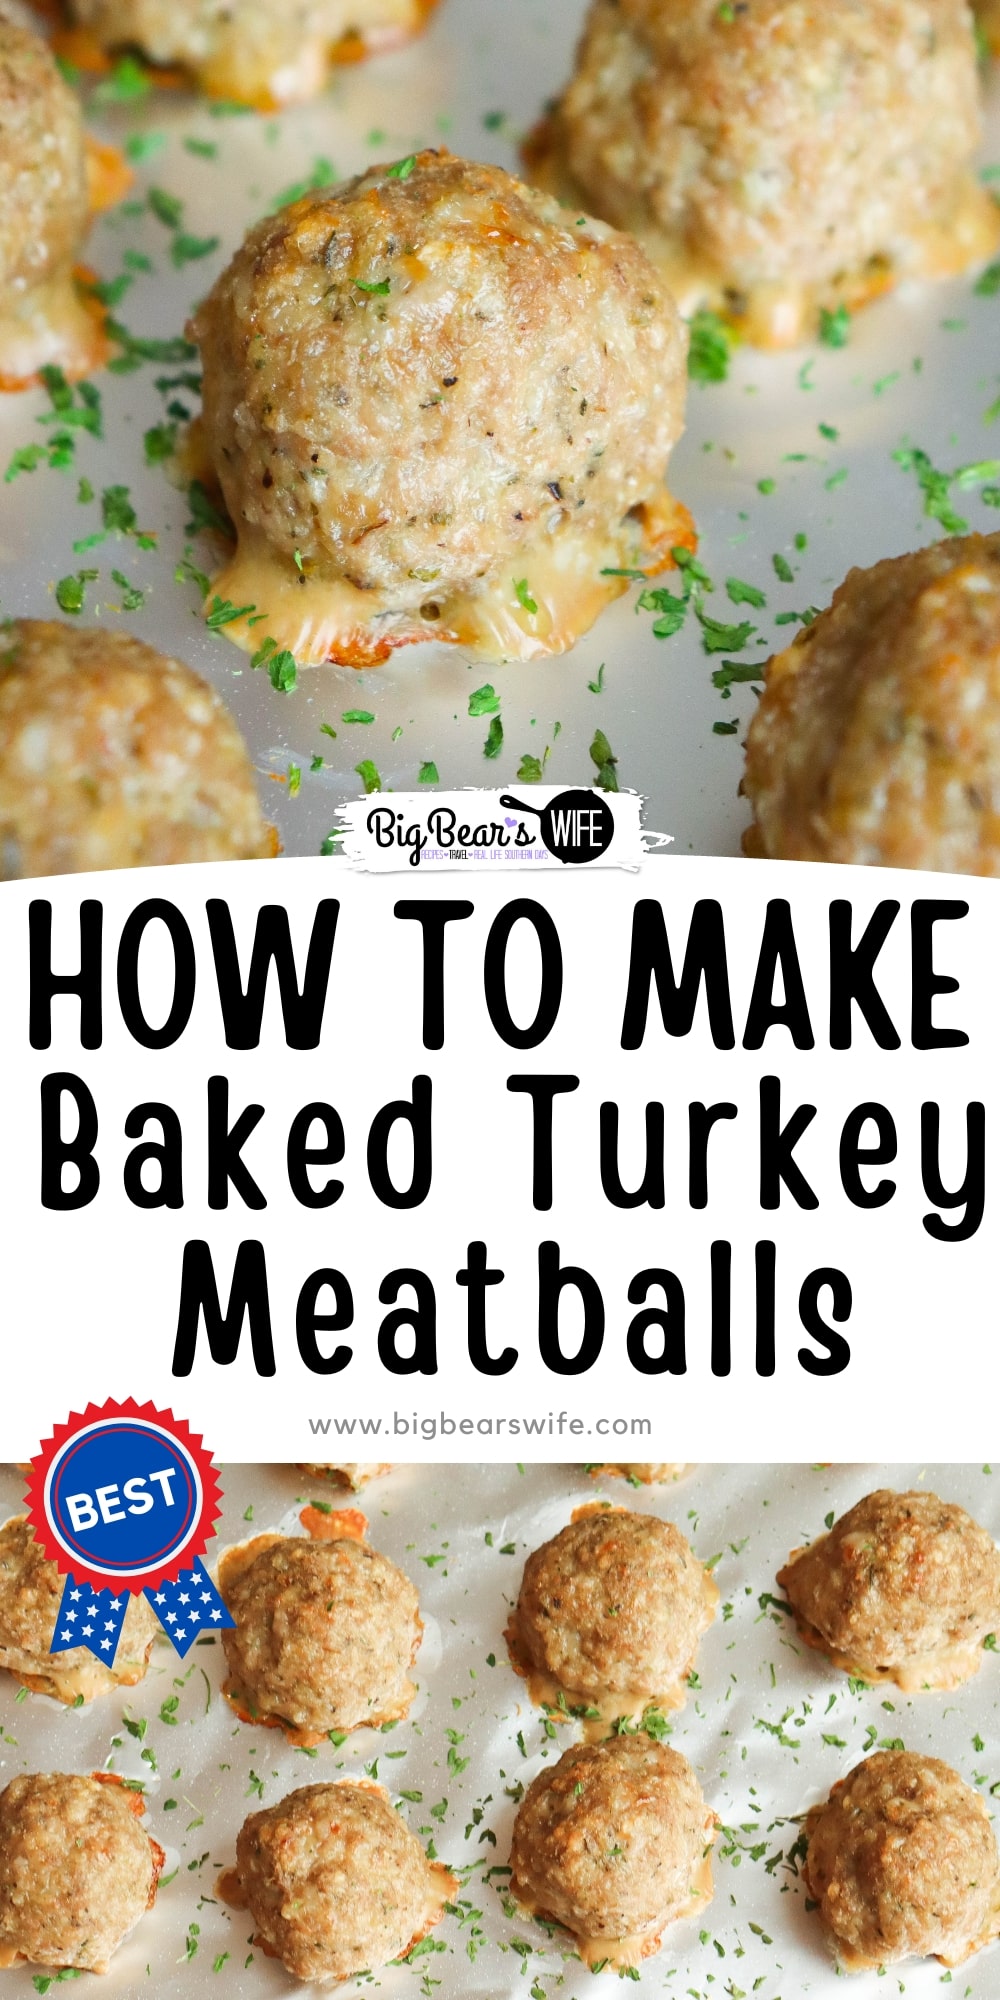 These Baked Turkey Meatballs are perfect for spaghetti and meatballs, slow cooker BBQ meatballs, Meatballs in sauce, meatball subs and so much more!  via @bigbearswife